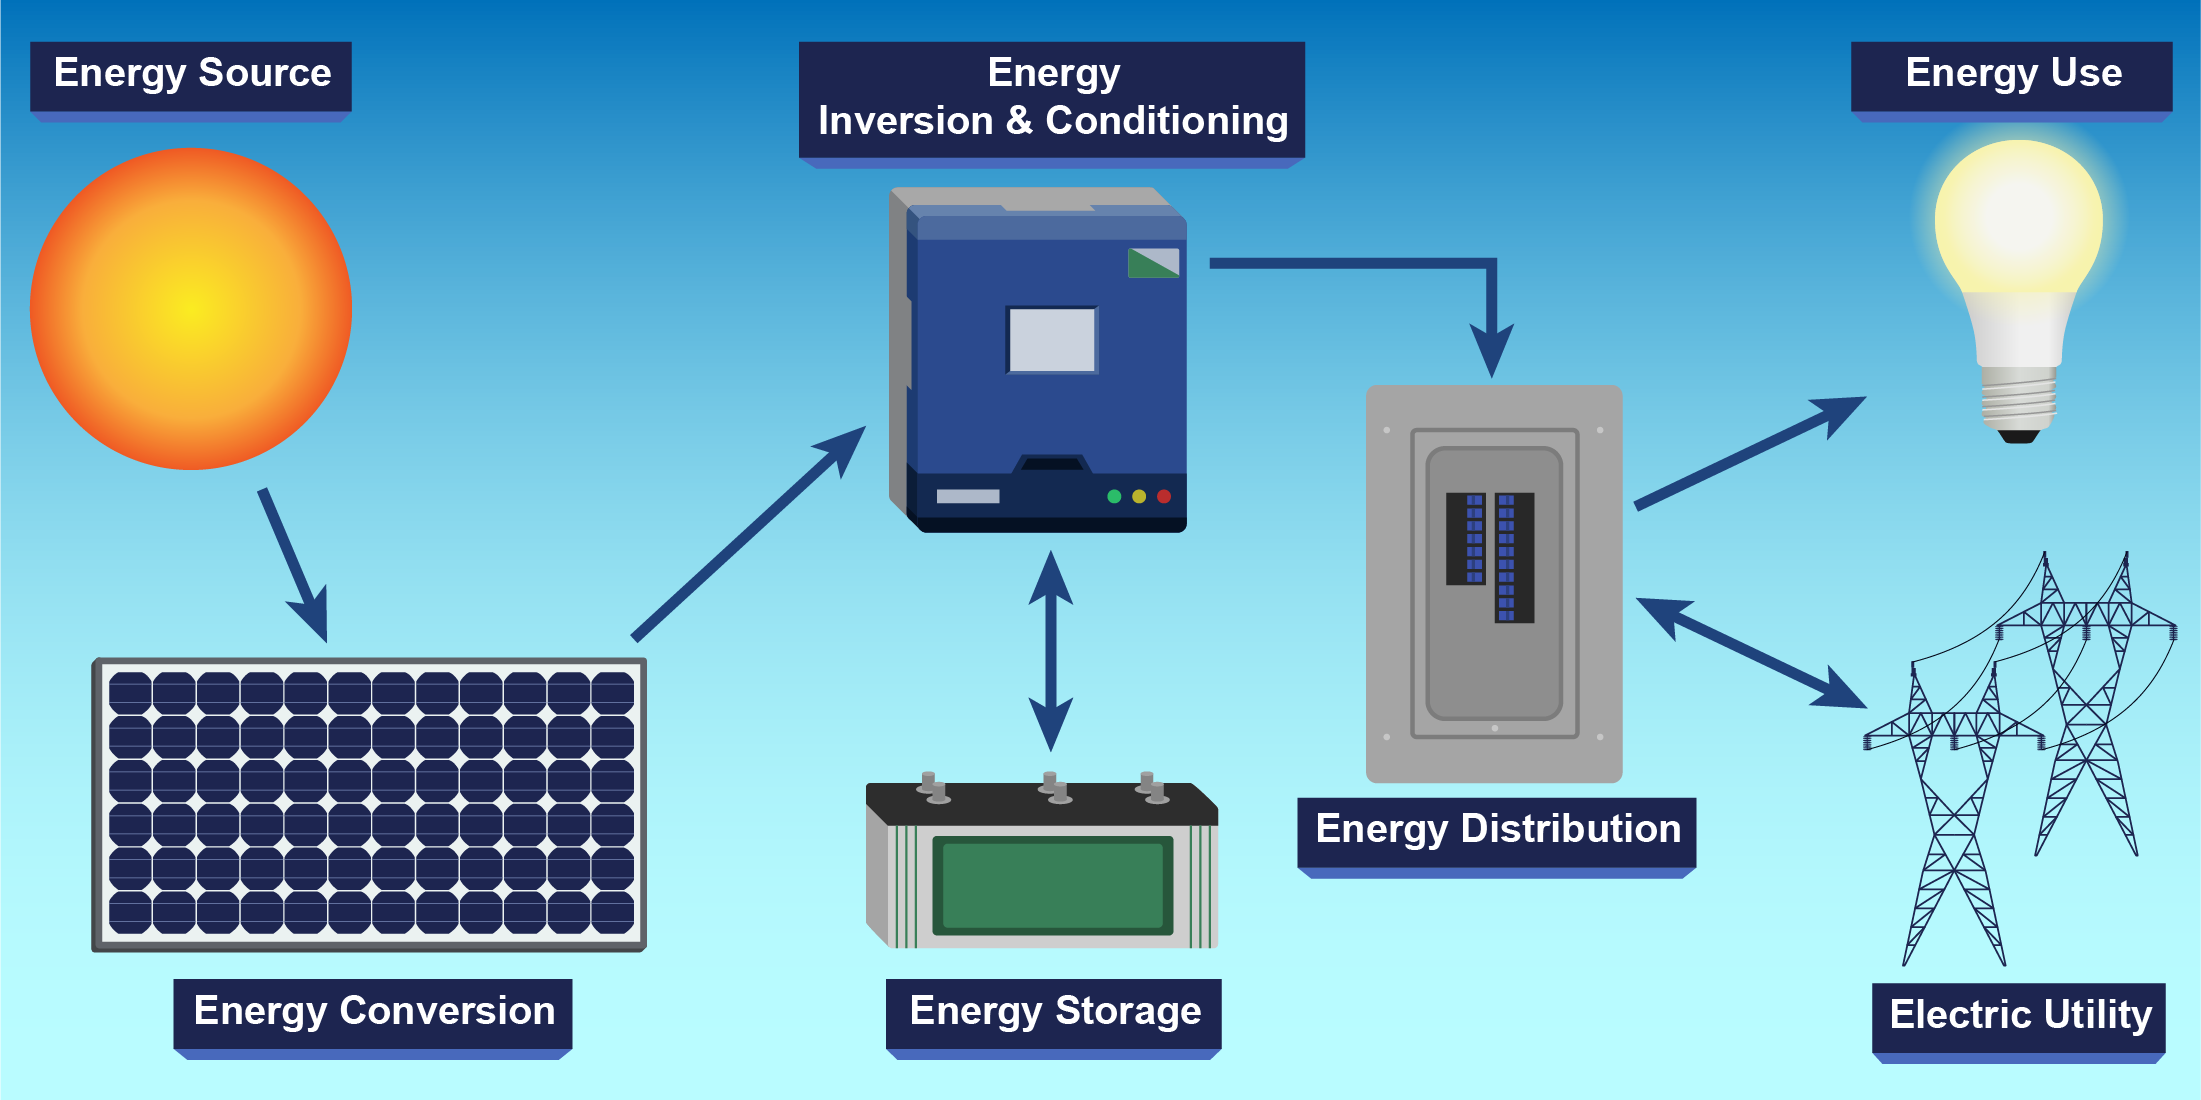 https://renergyinfo.com/5-free-solar-energy-courses-to-boost-your-carrier-by-energy-swaraj/